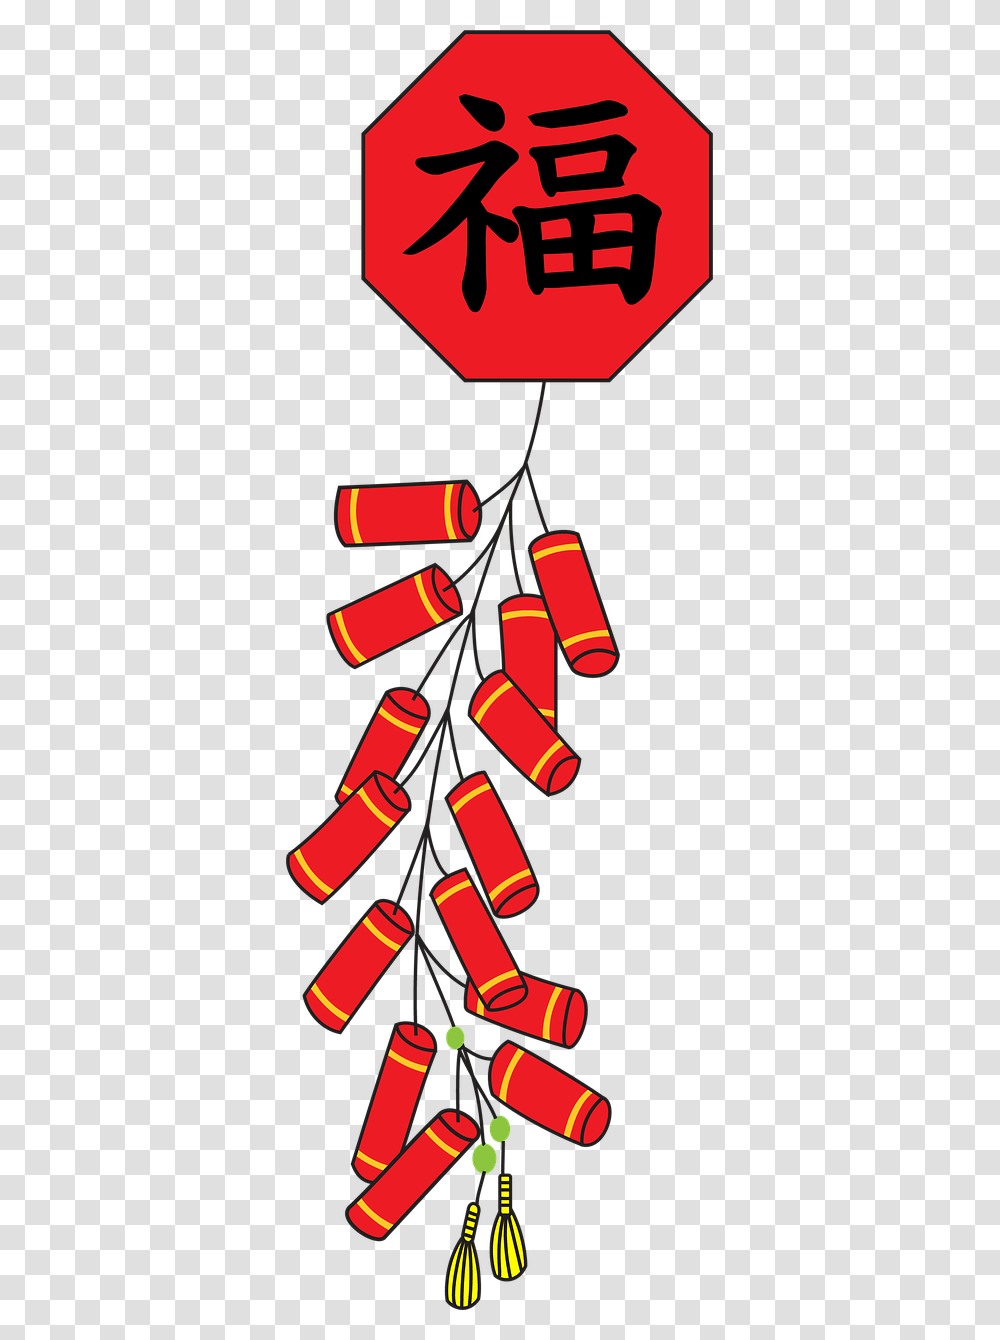 Chinese Firecracker Red, Weapon, Weaponry, Bomb, Dynamite Transparent Png